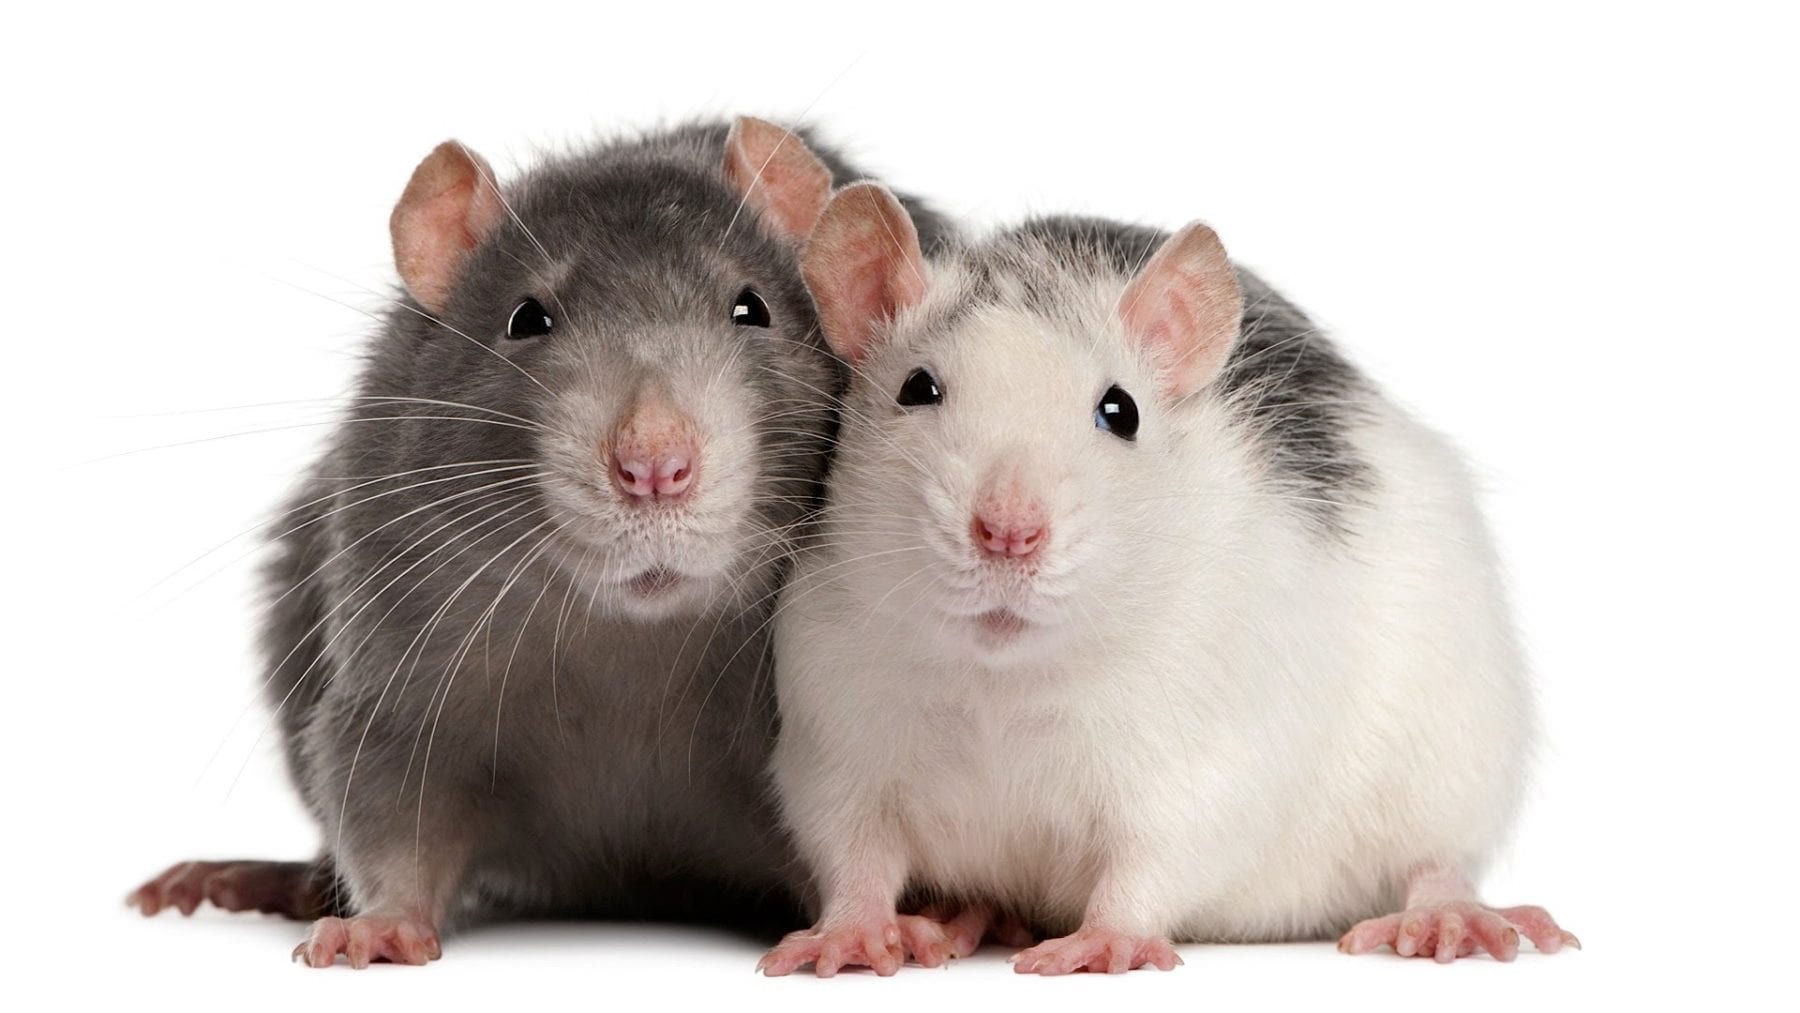 Rats are able to detect whether a child has tuberculosis (TB)